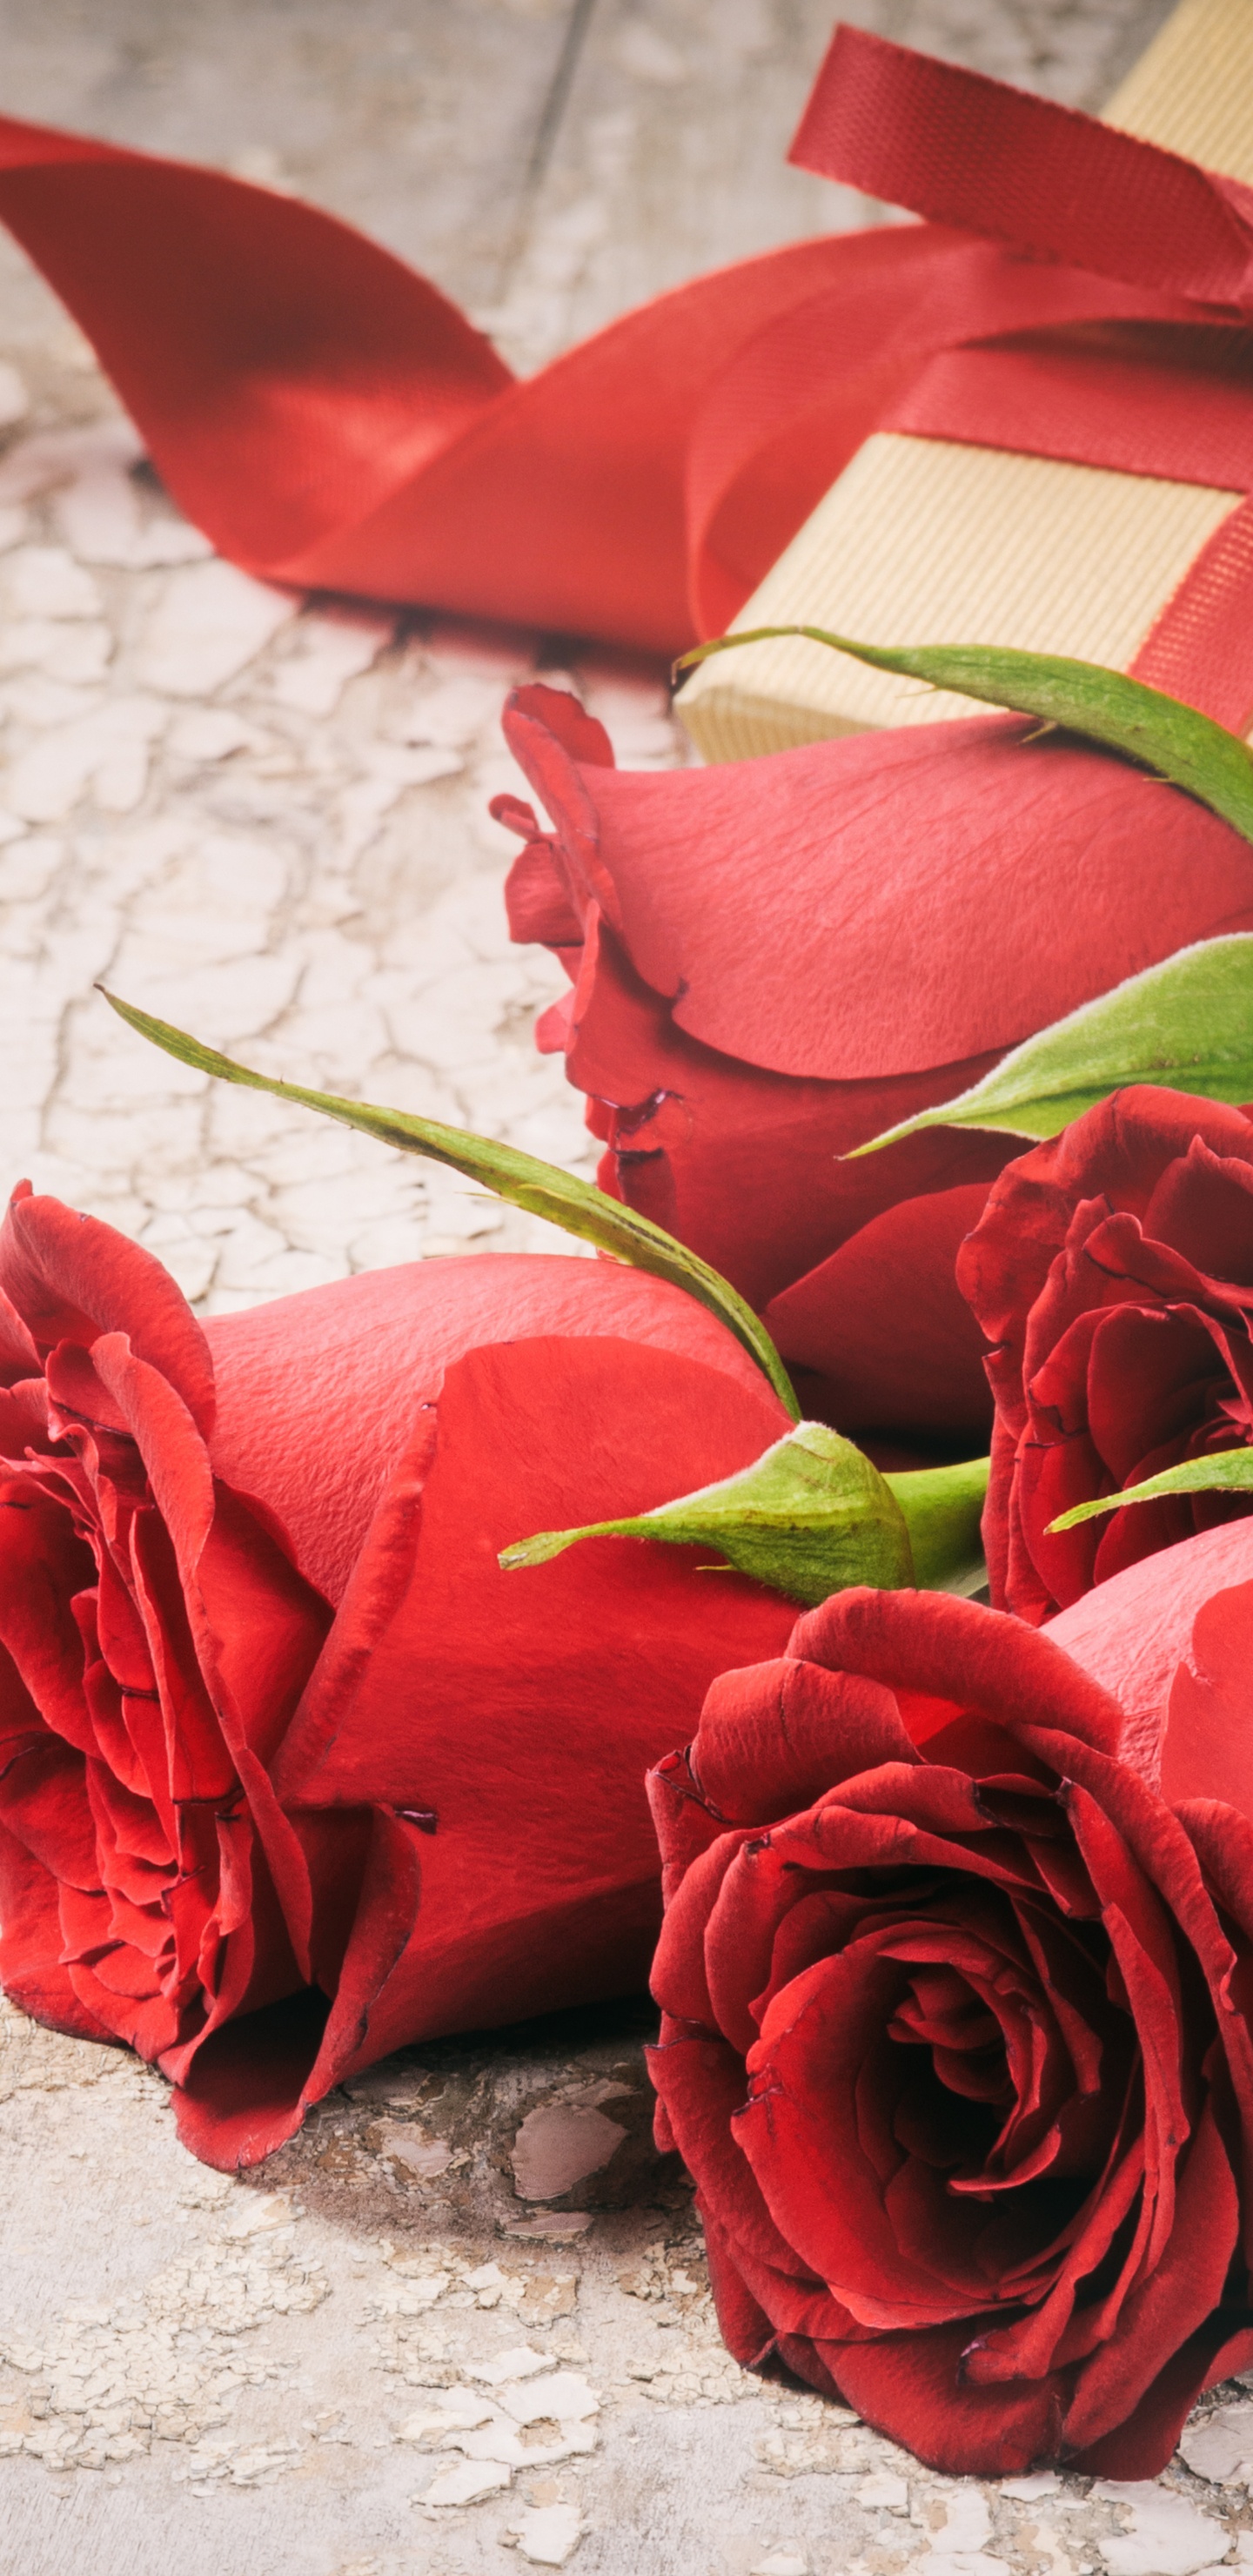 Red Roses on White Textile. Wallpaper in 1440x2960 Resolution